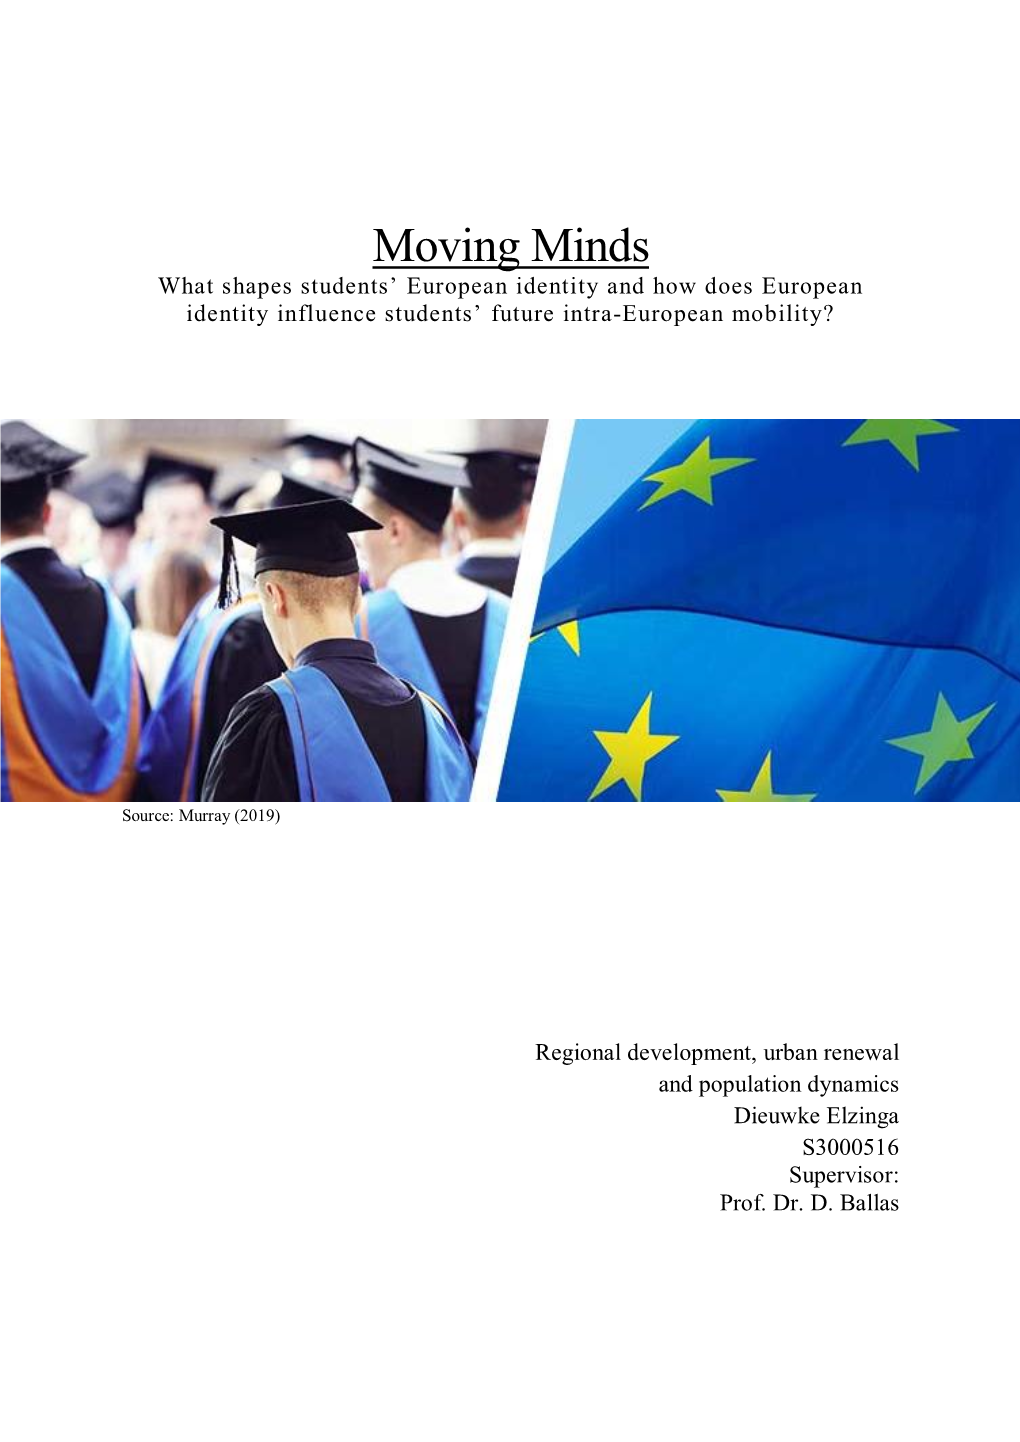 Moving Minds What Shapes Students’ European Identity and How Does European Identity Influence Students’ Future Intra-European Mobility?